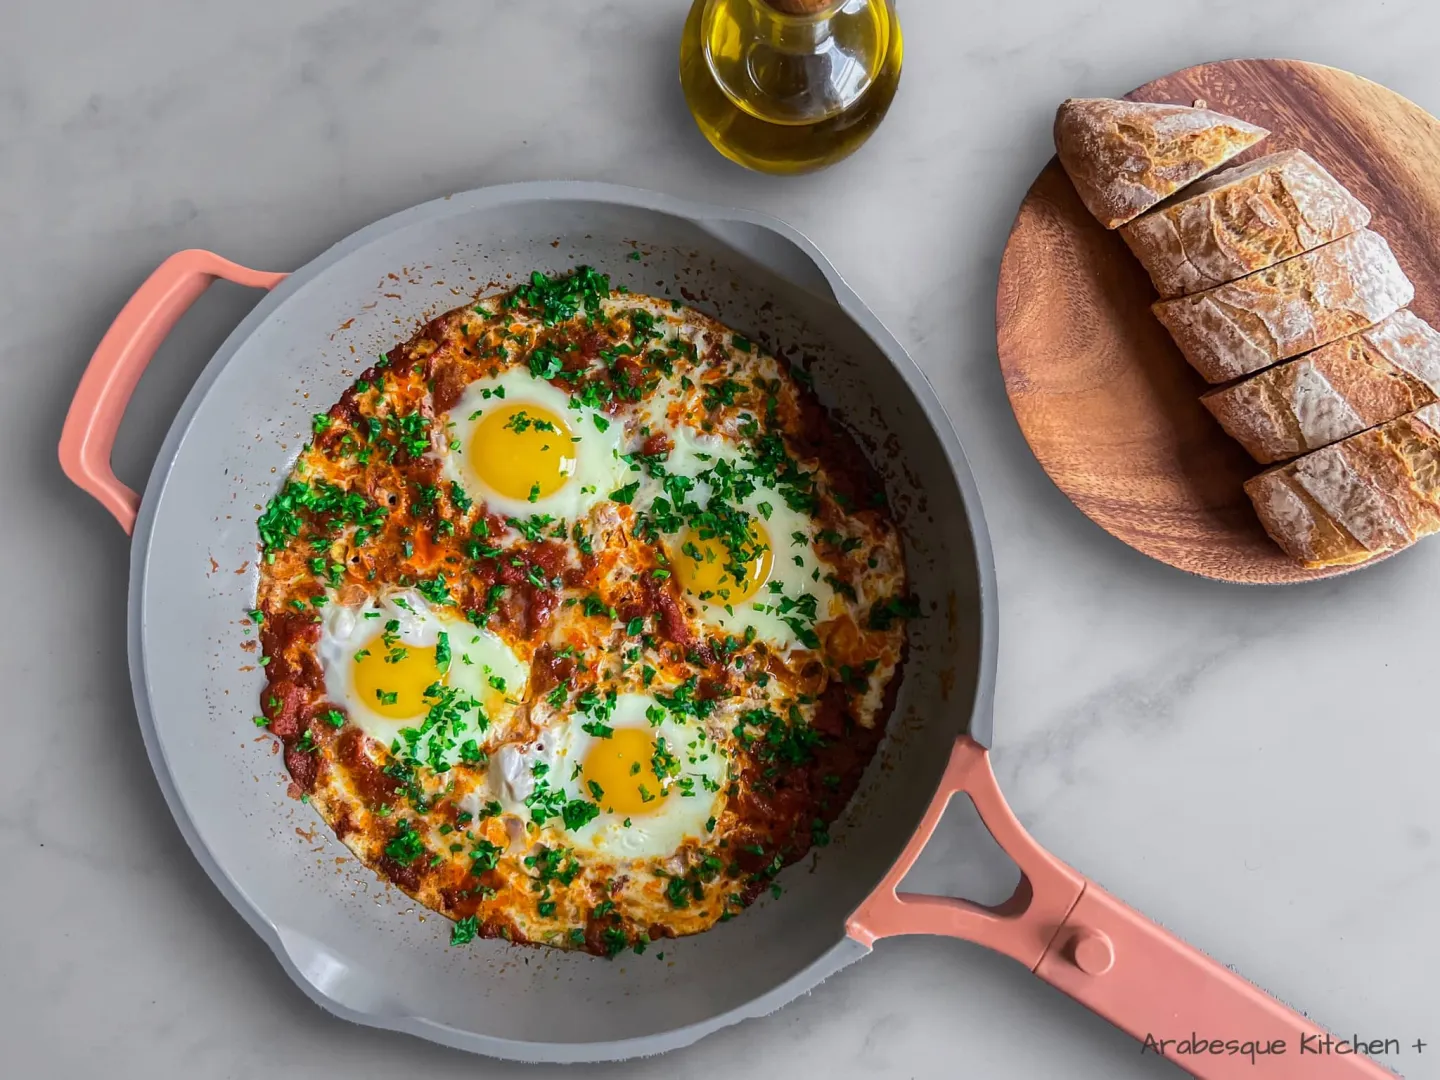  Classic shakshuka (with tomatoes and eggs)